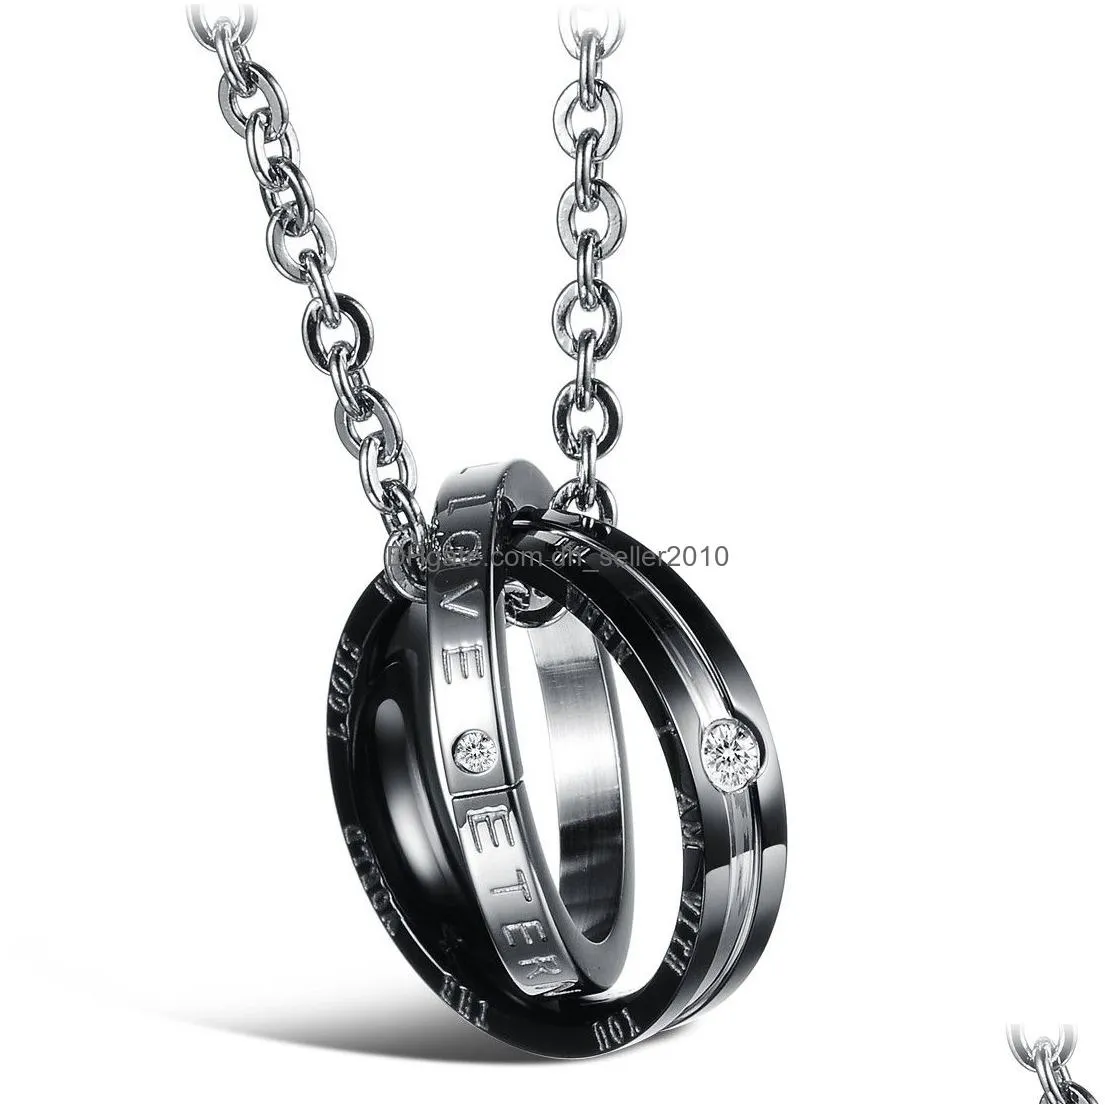 eternal crystal round ring pendant necklace stainless steel couple necklace for women men wedding romantic valentines day love gift